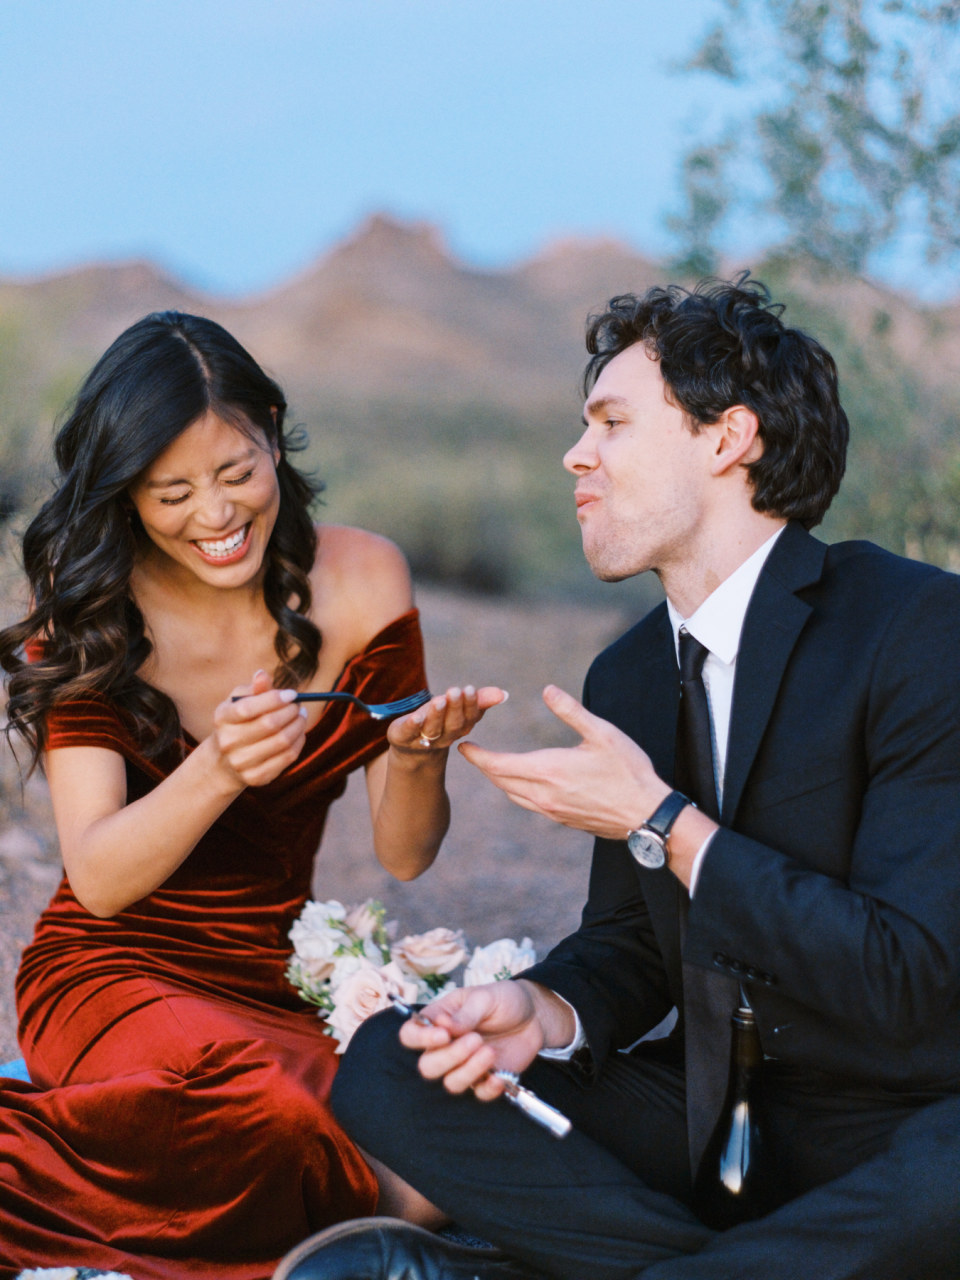 Woman laughing holding fork up and man chewing and laughing.